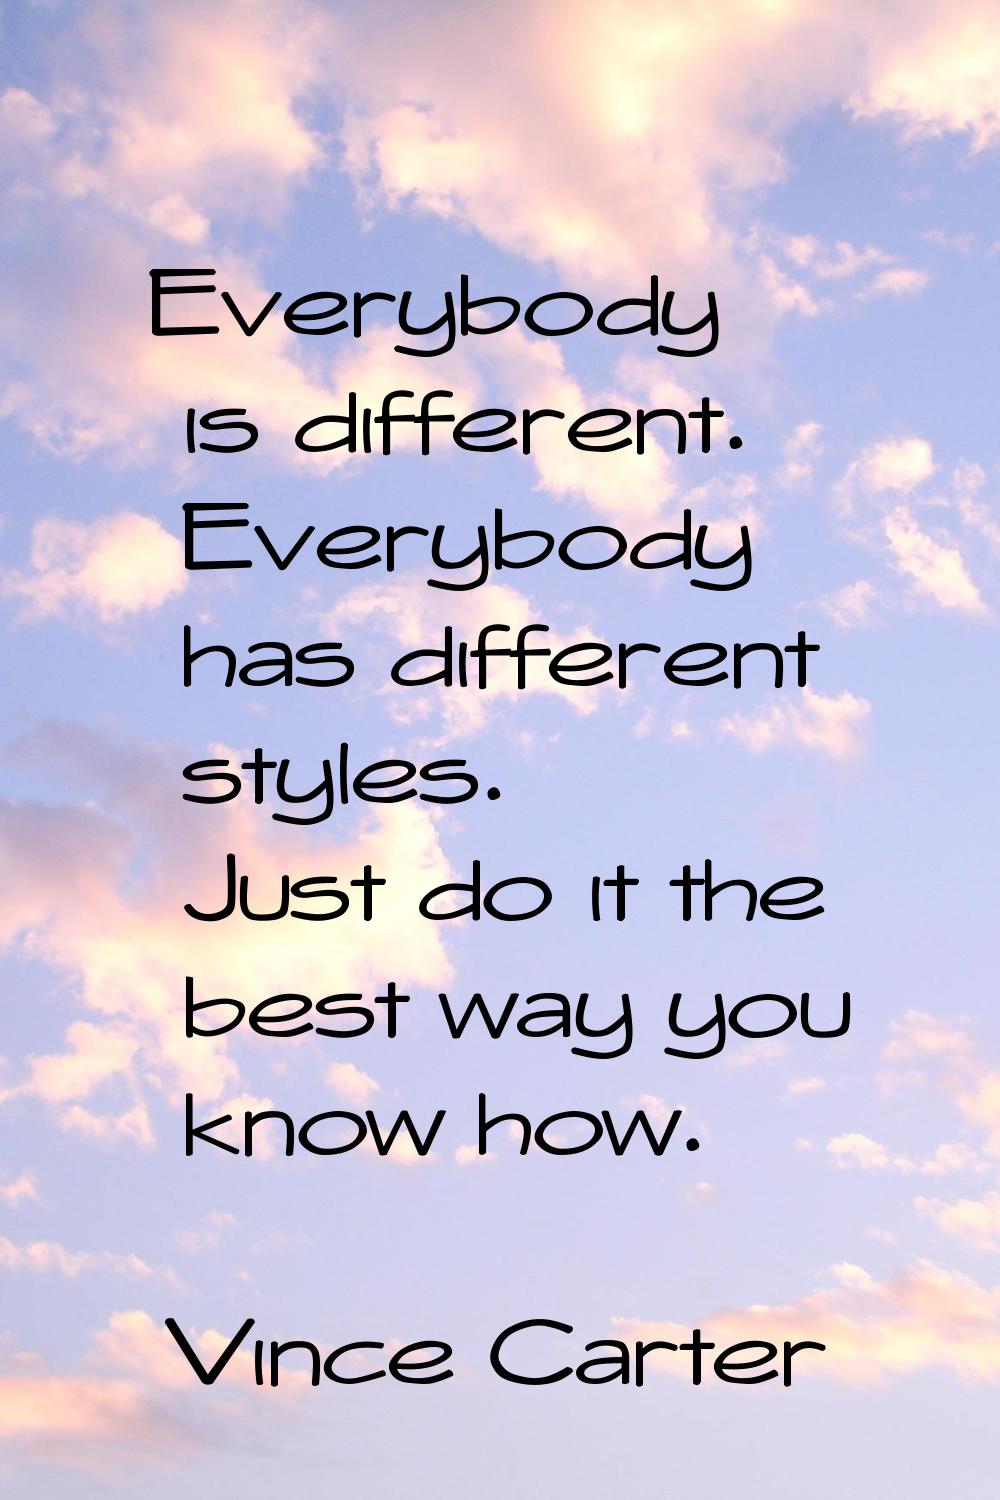 Everybody is different. Everybody has different styles. Just do it the best way you know how.